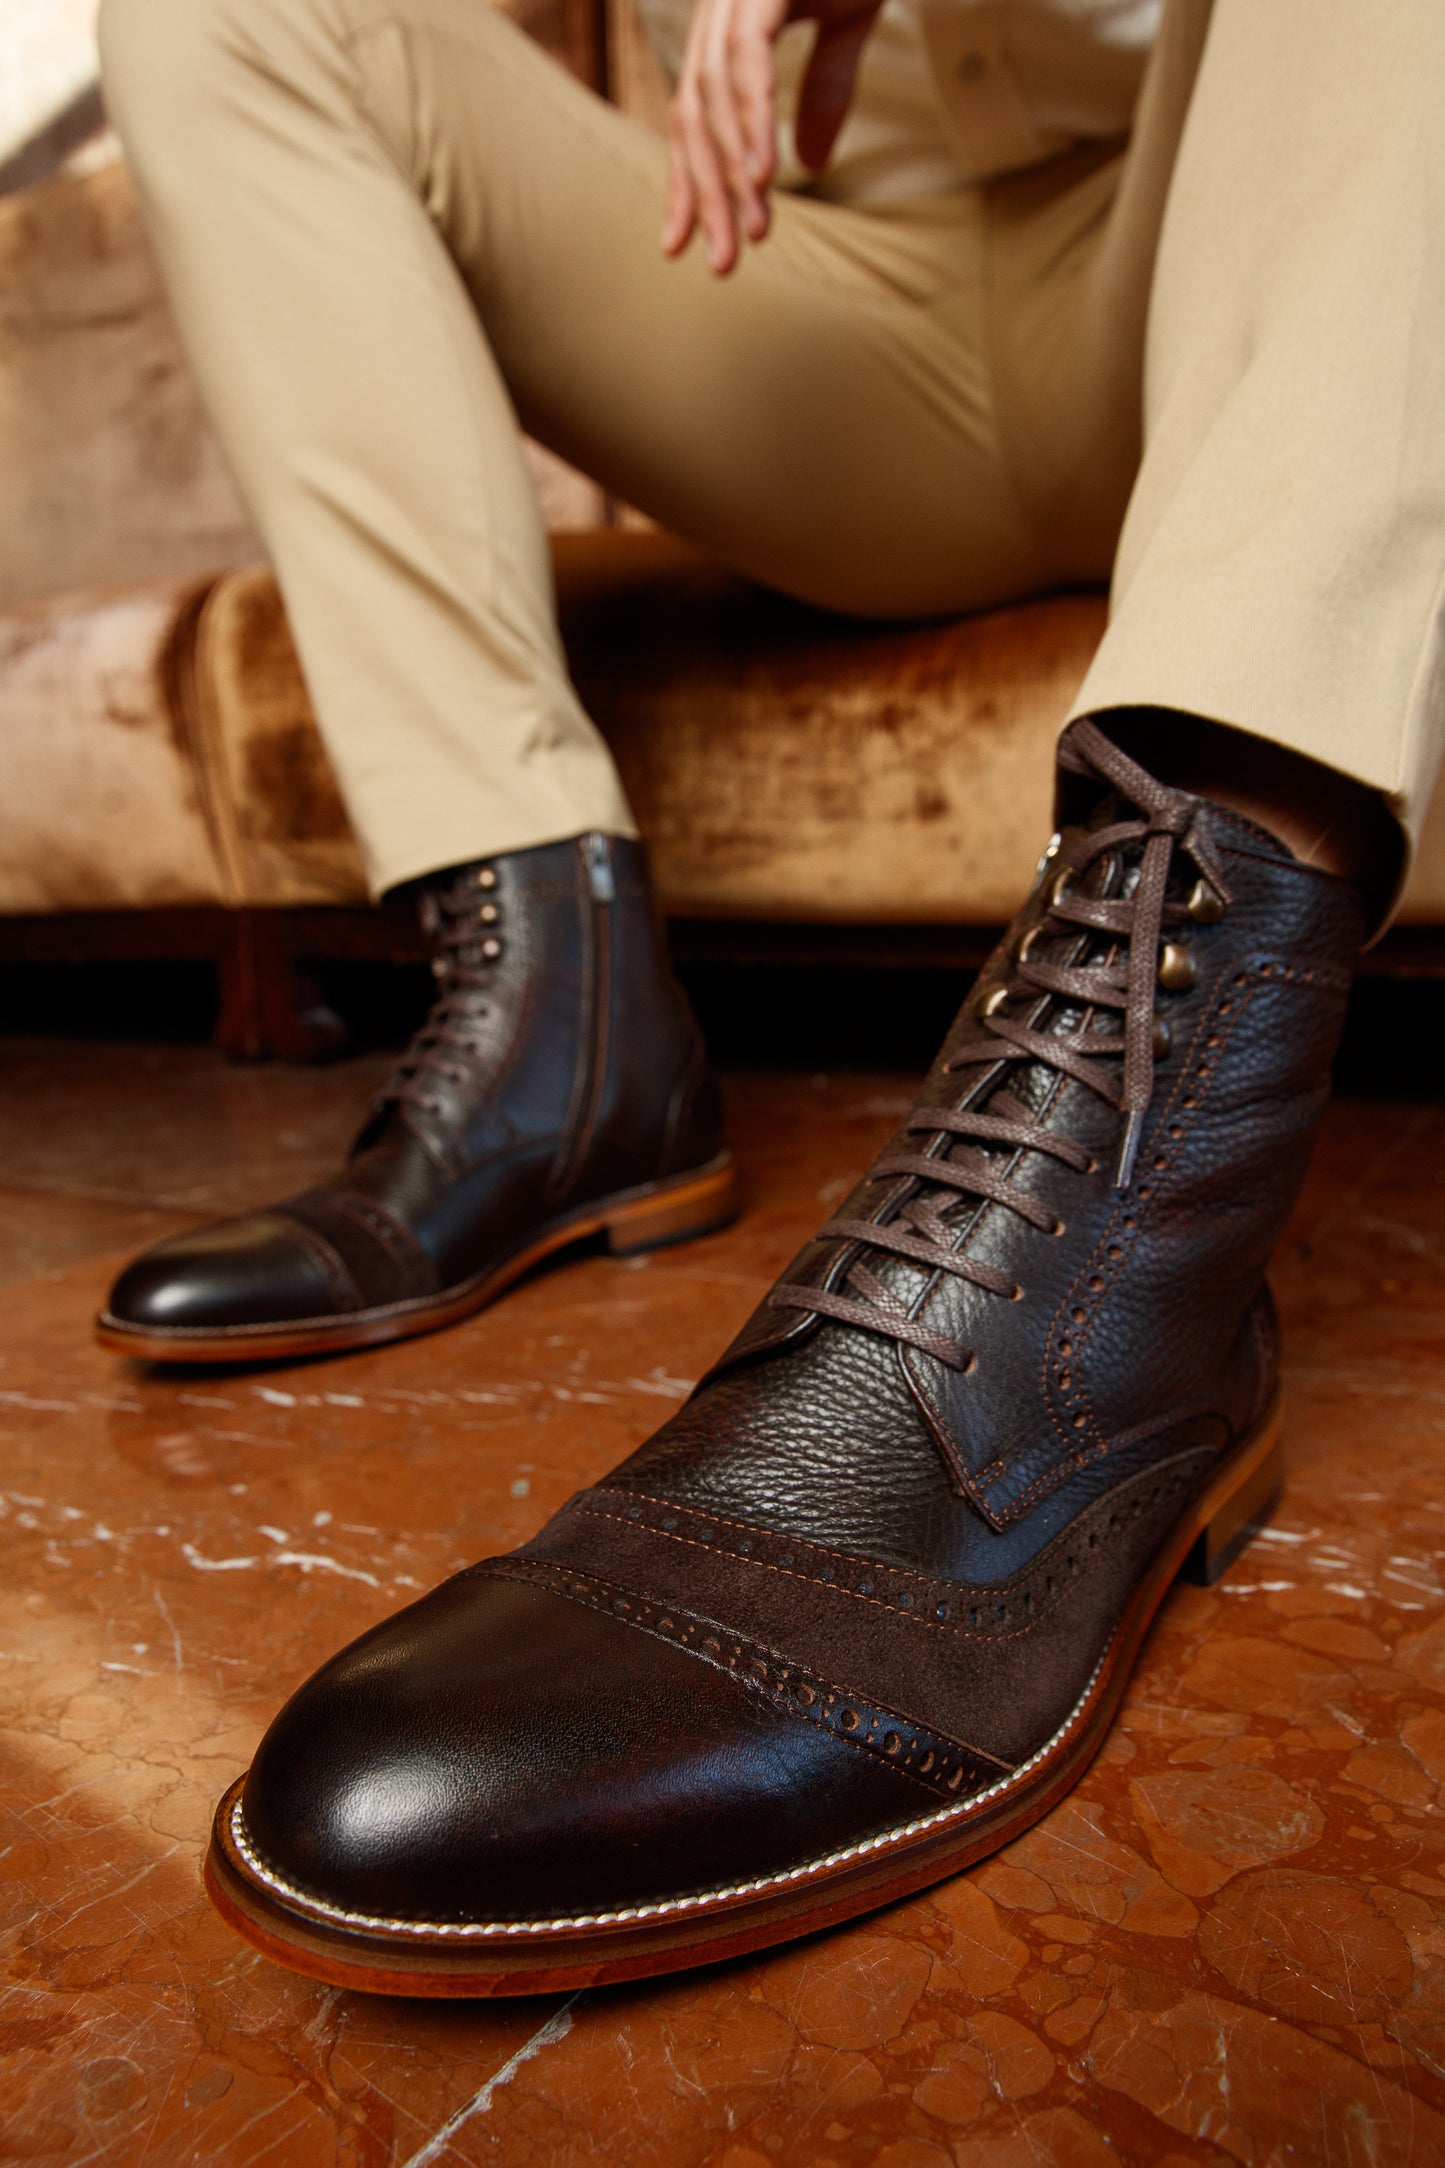 The Anderson Brown Leather & Suede Brogue Lace-Up Men Boot with a Zipper